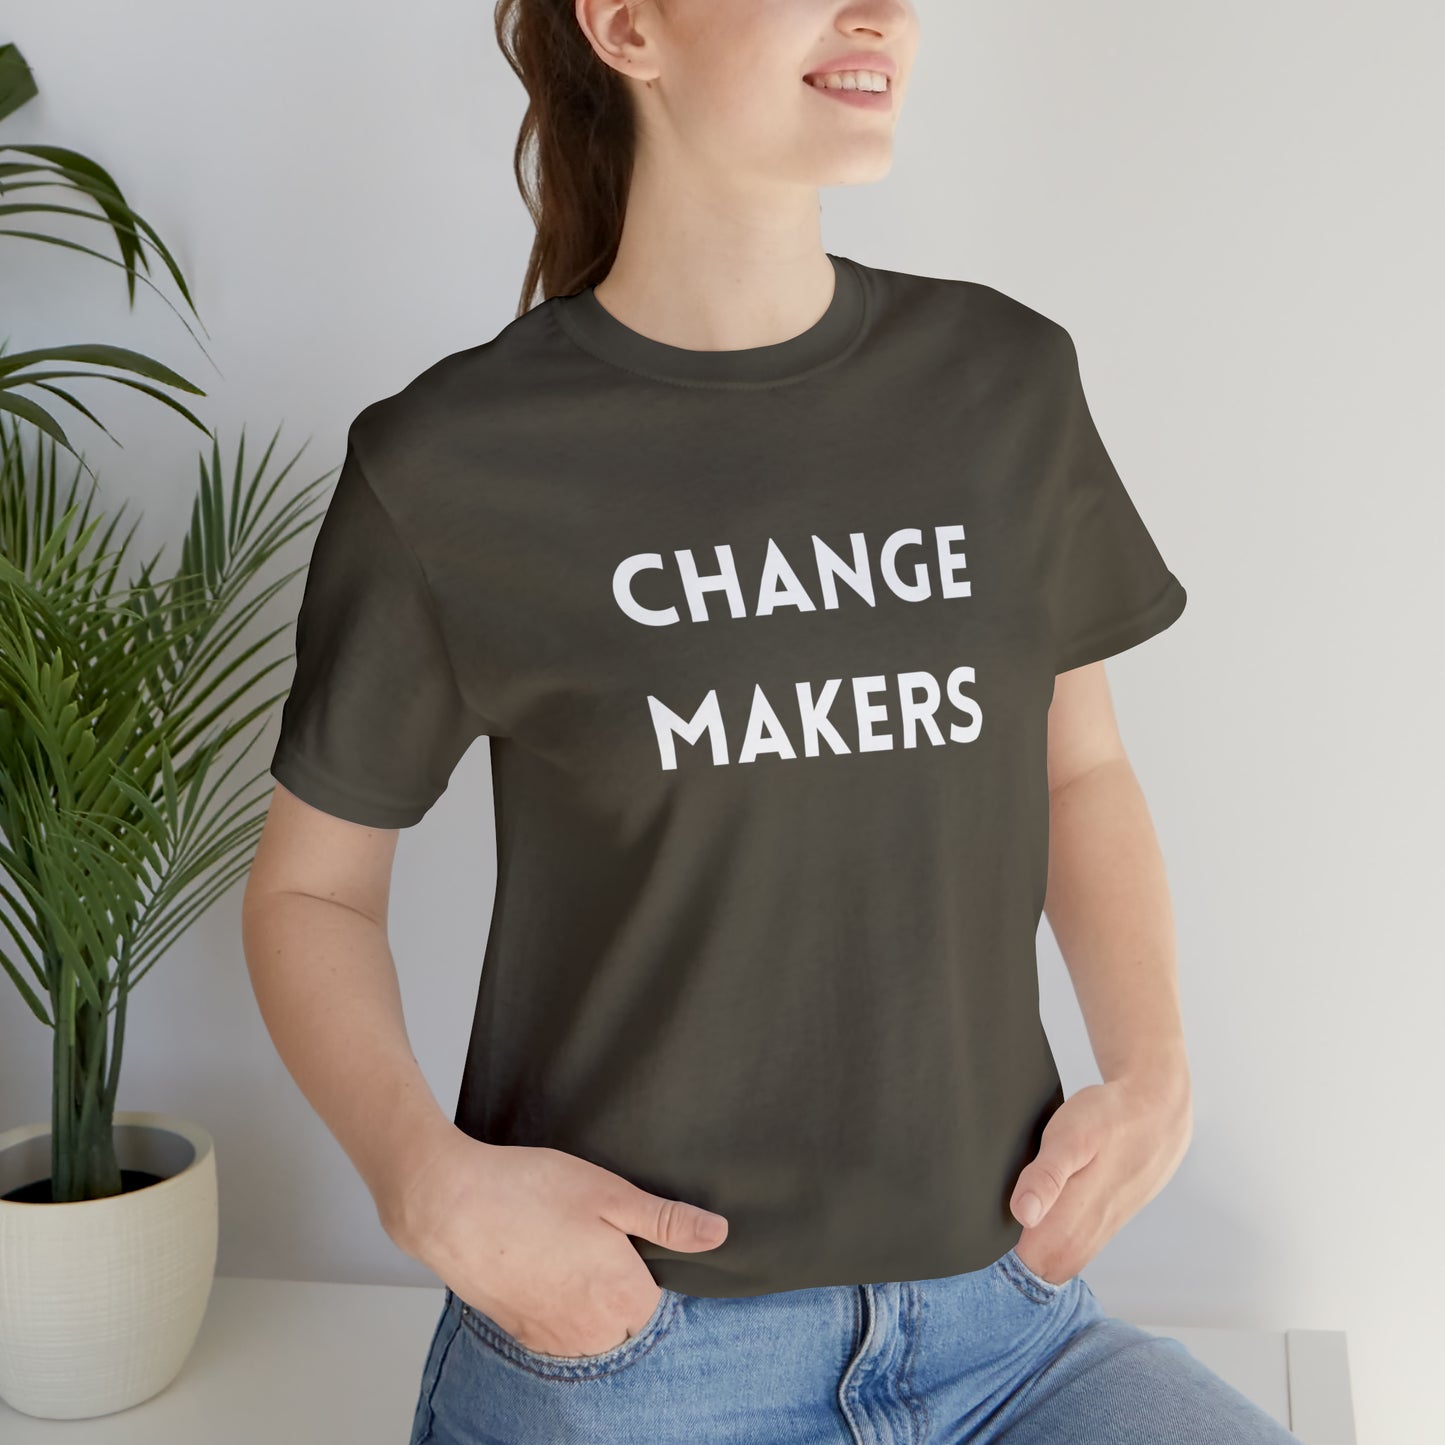 Inspirational T-Shirt About Change | For Change Maker Army T-Shirt Petrova Designs